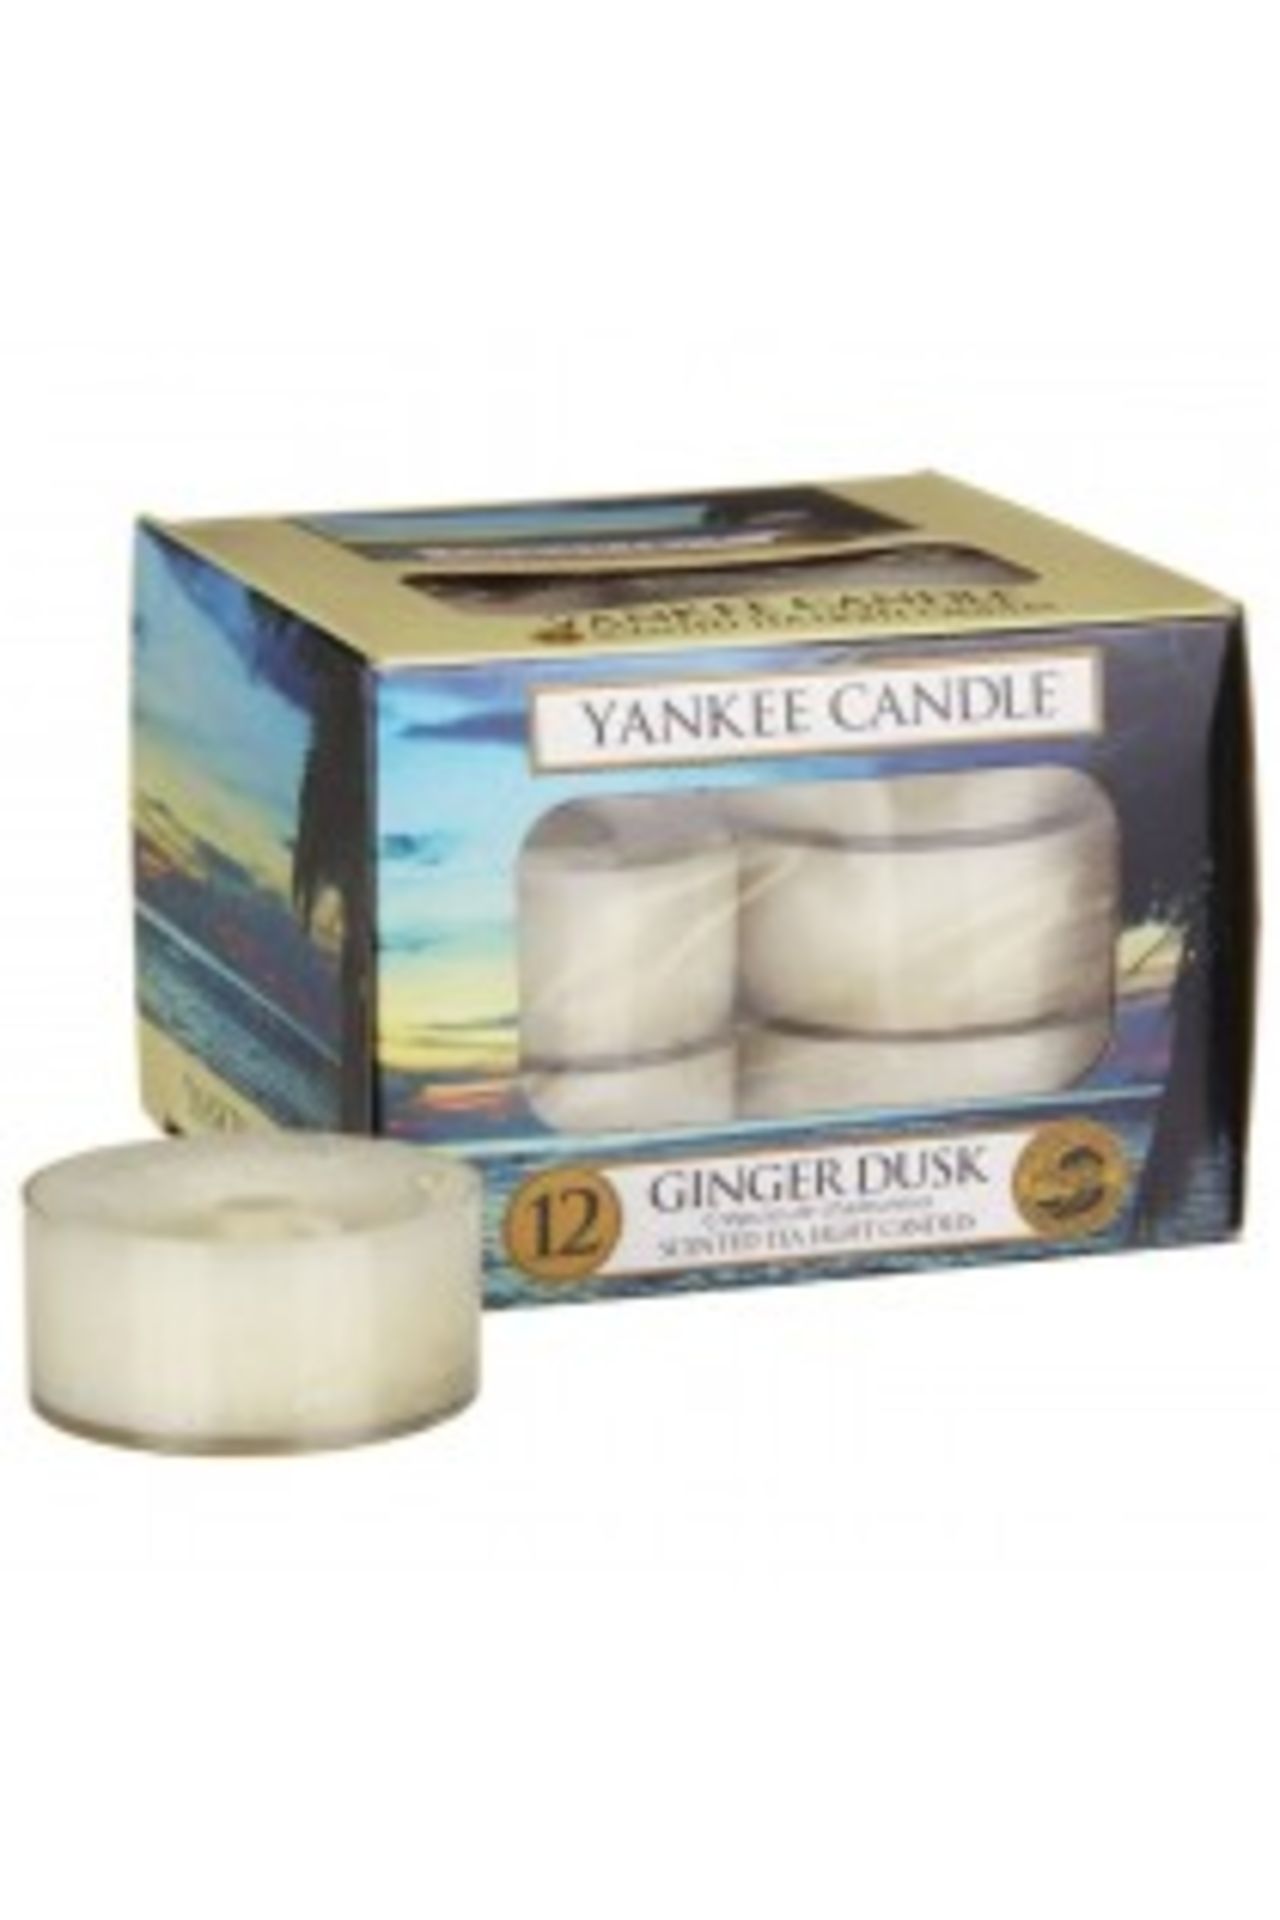 V Brand New 12 Yankee Candle Scented Tea Light Candles Ginger Dusk eBay Price £6.95 X 2 YOUR BID